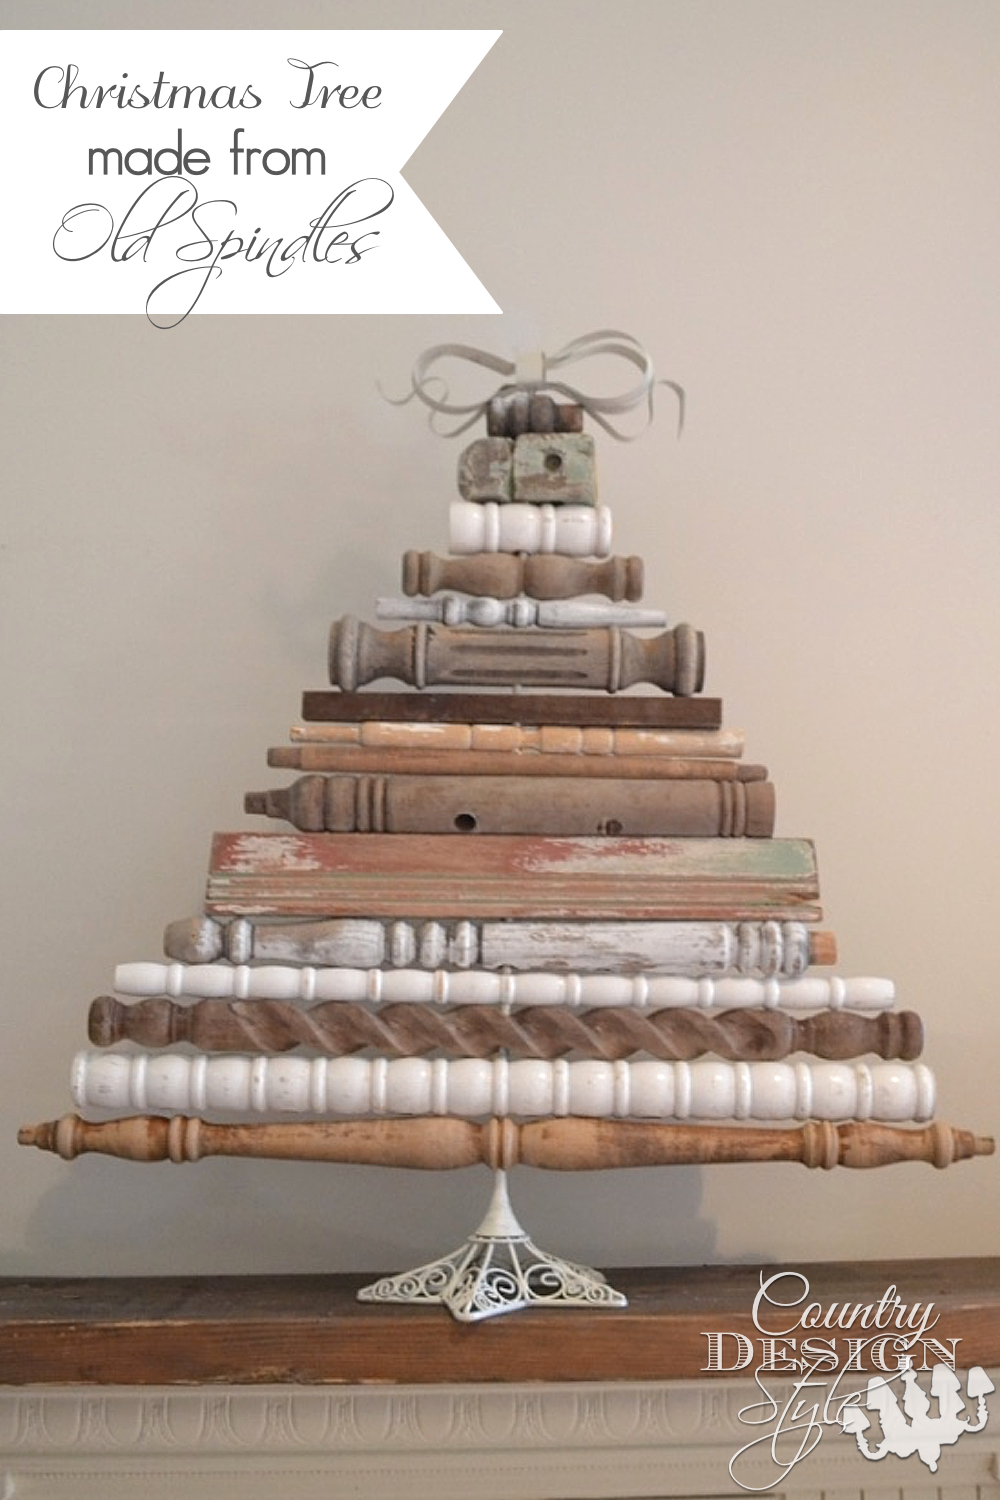 christmas-tree-made-from-spindles-countrydesignstyle-com-pn4